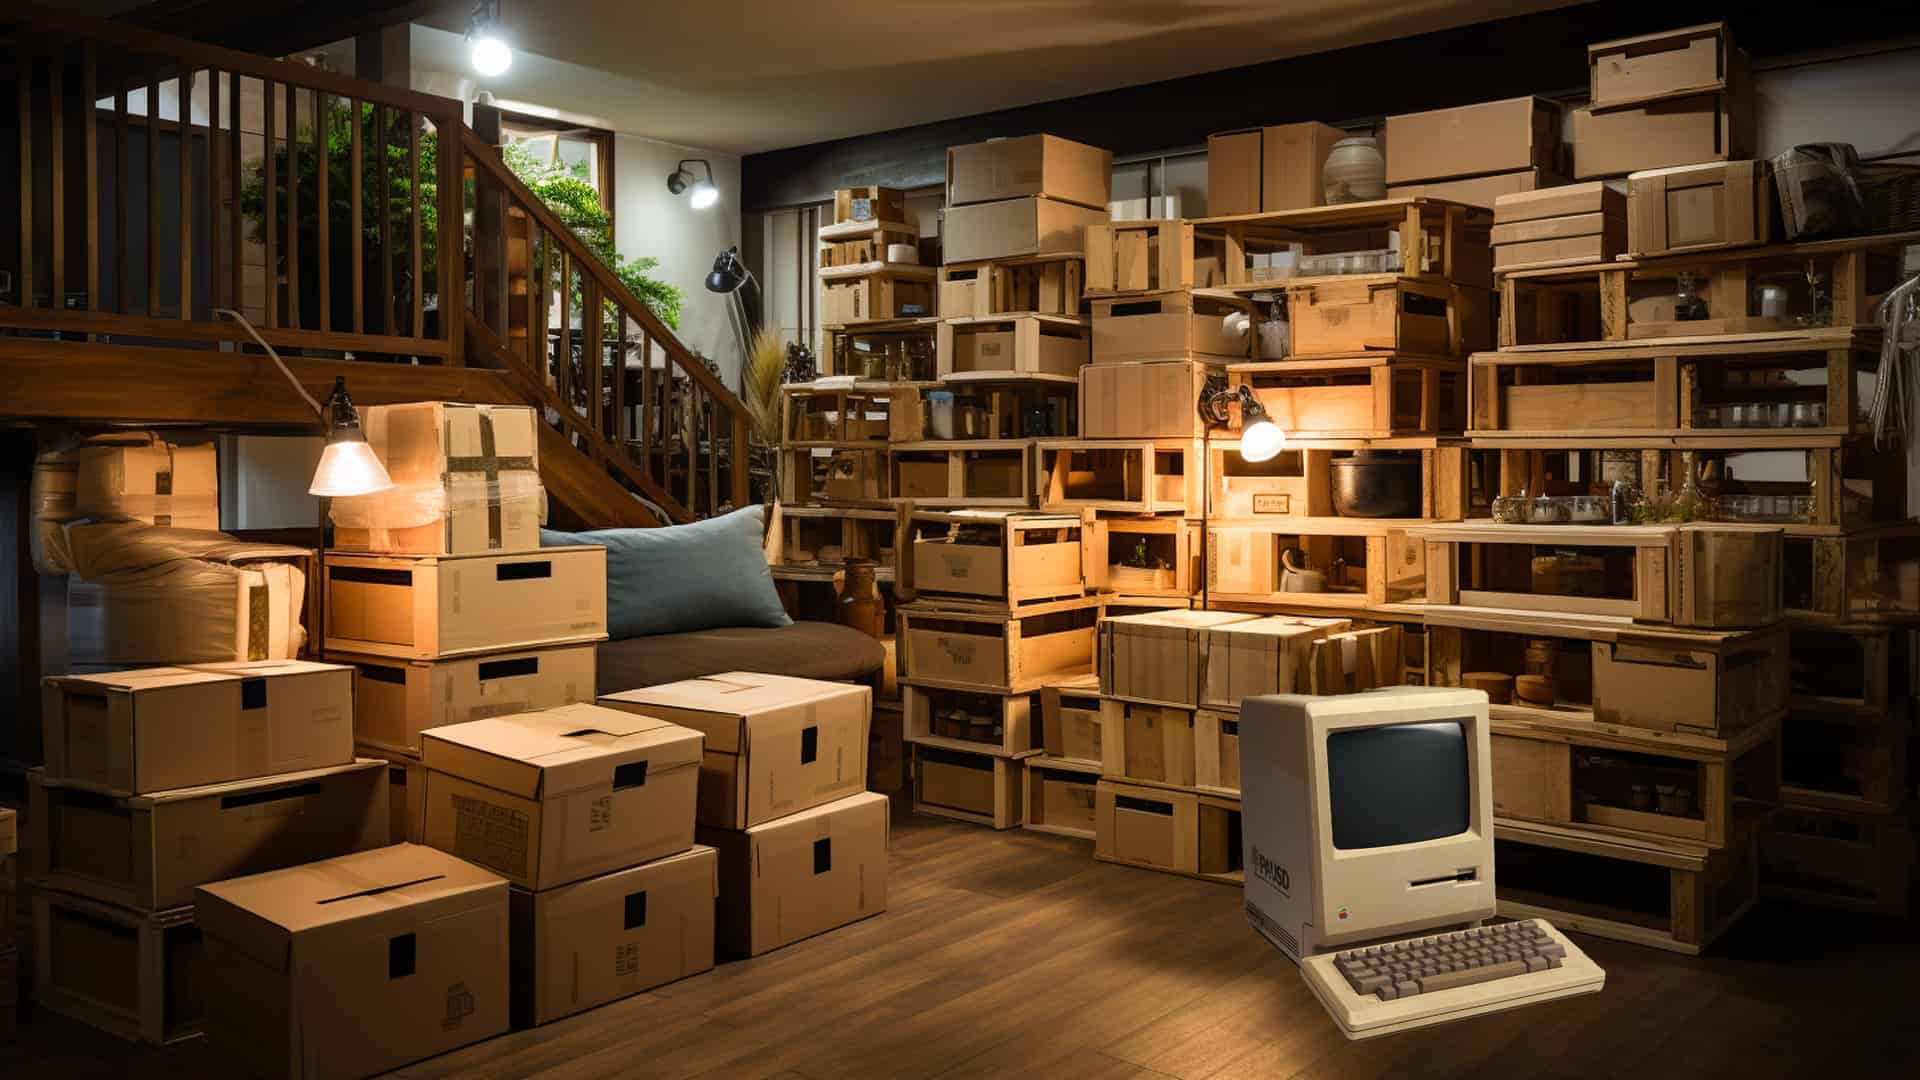 These Old Apple Macintosh Computers Are Worth Millions – & You Might Have One Hiding In Your Basement